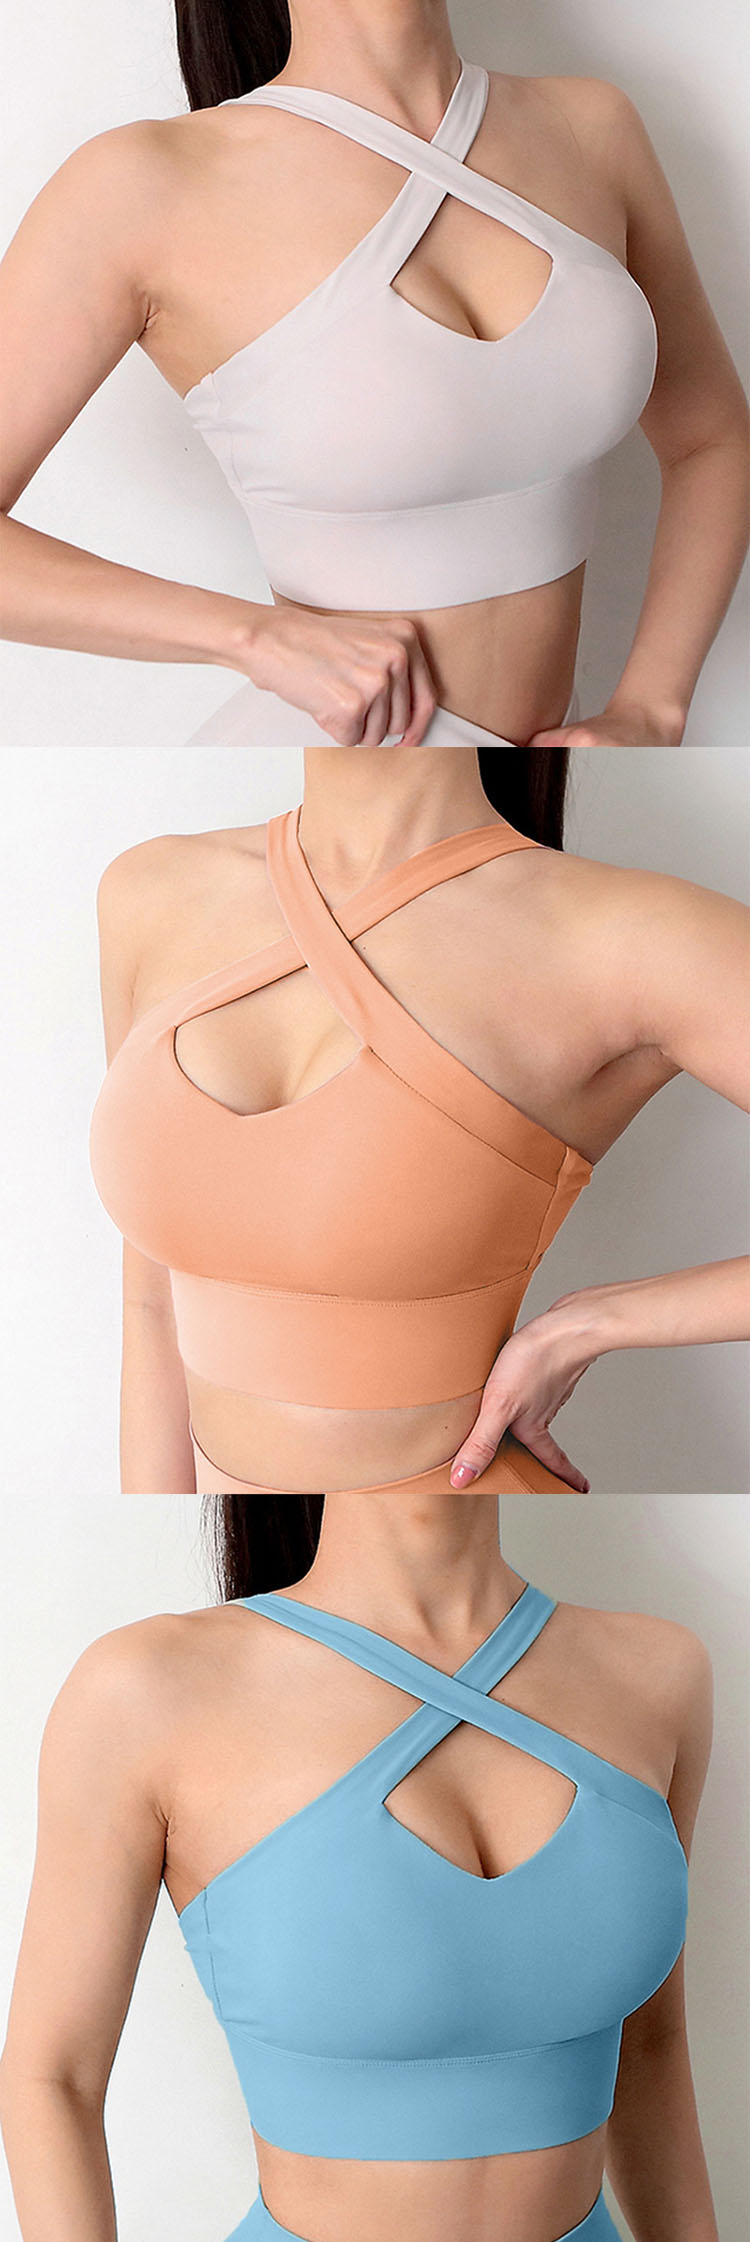 The use of bows in the chest design includes super supportive sports bra